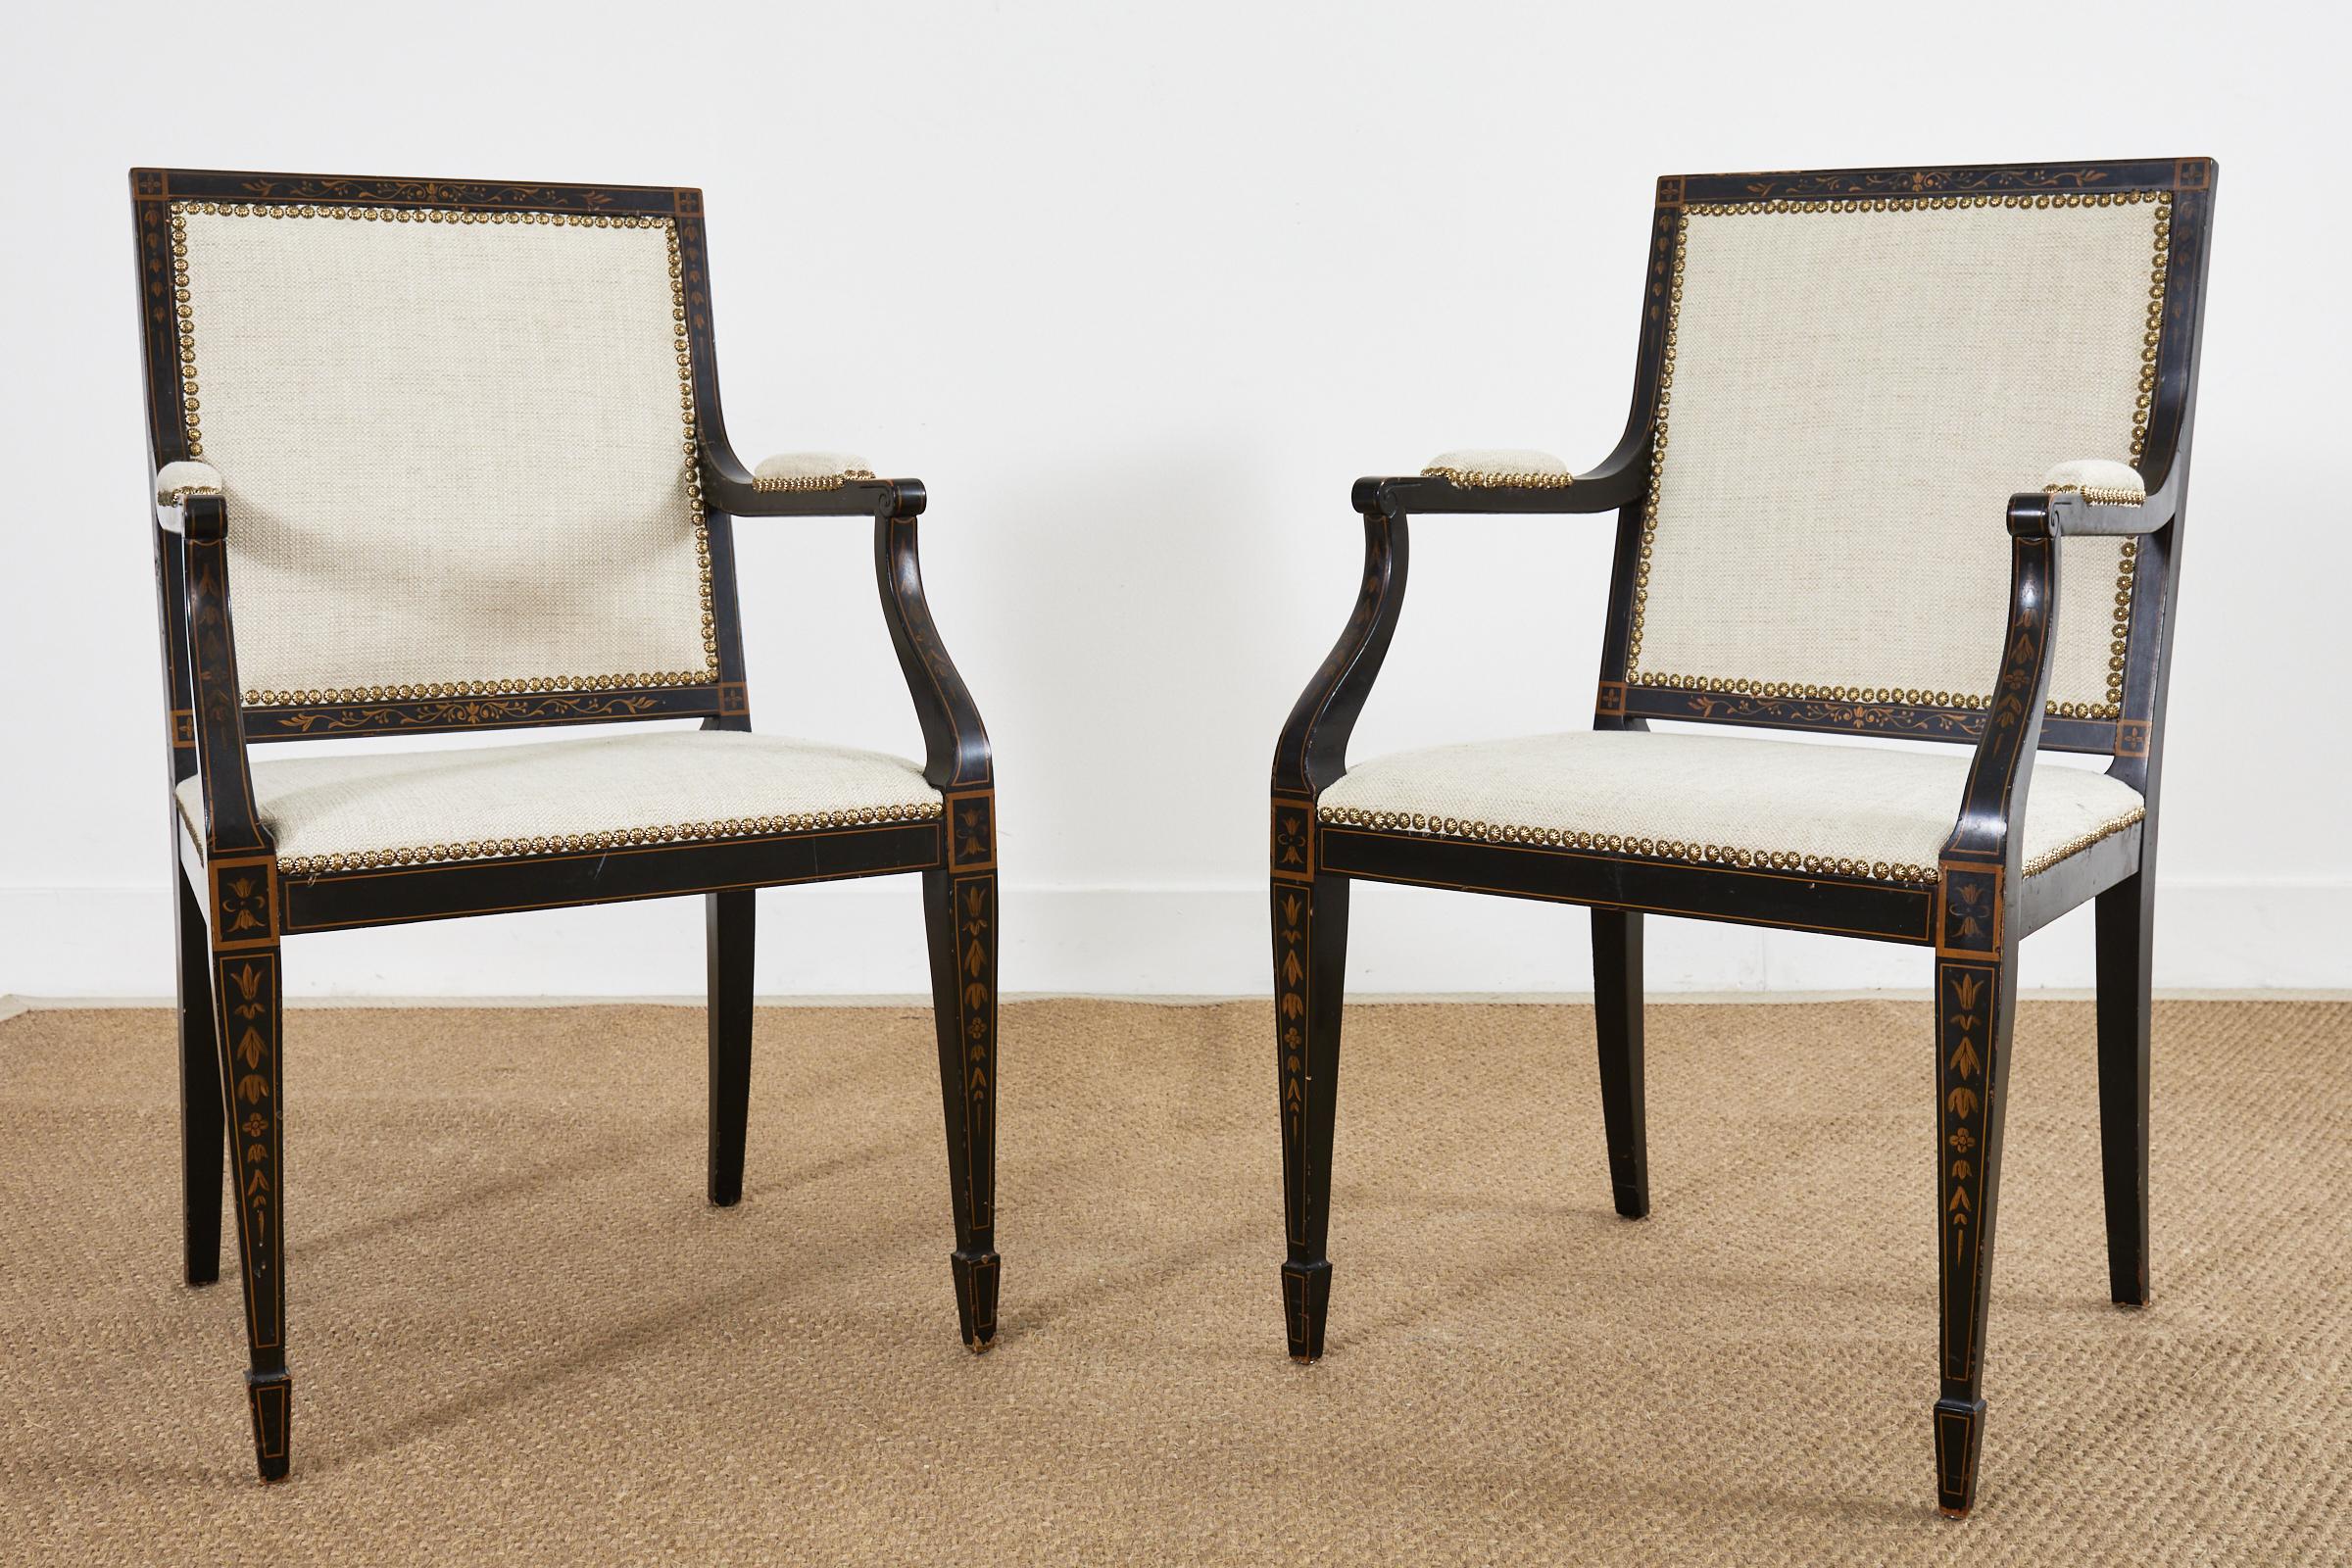 Brass Pair of Neoclassical Regency Style Ebonized Mahogany Library Chairs